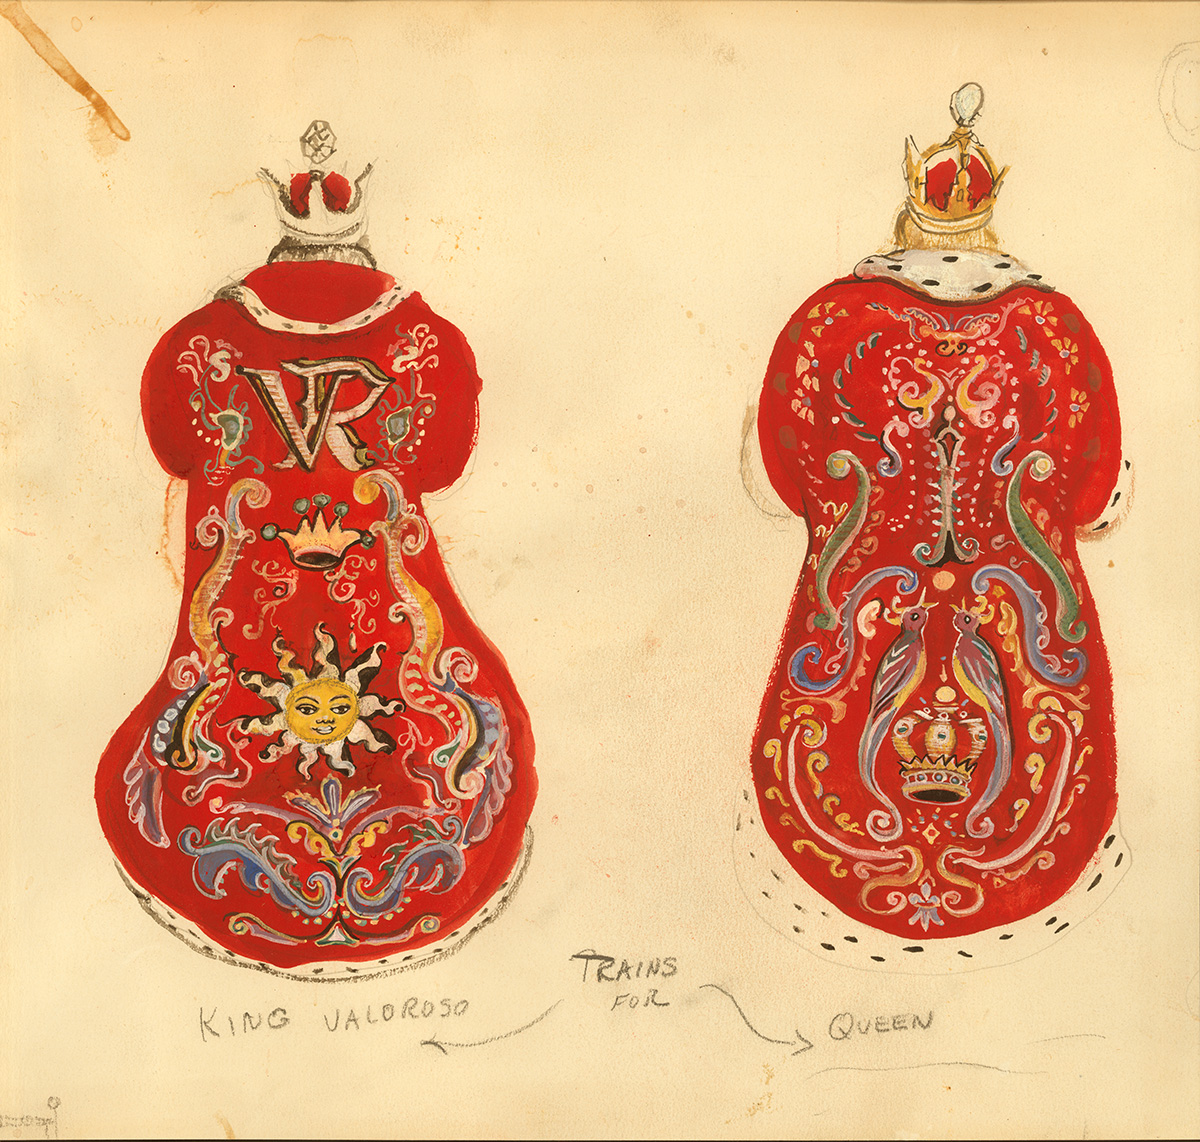 Costume study drawing of the trains for King Valoroso and Queen from "The Rose and the Ring"